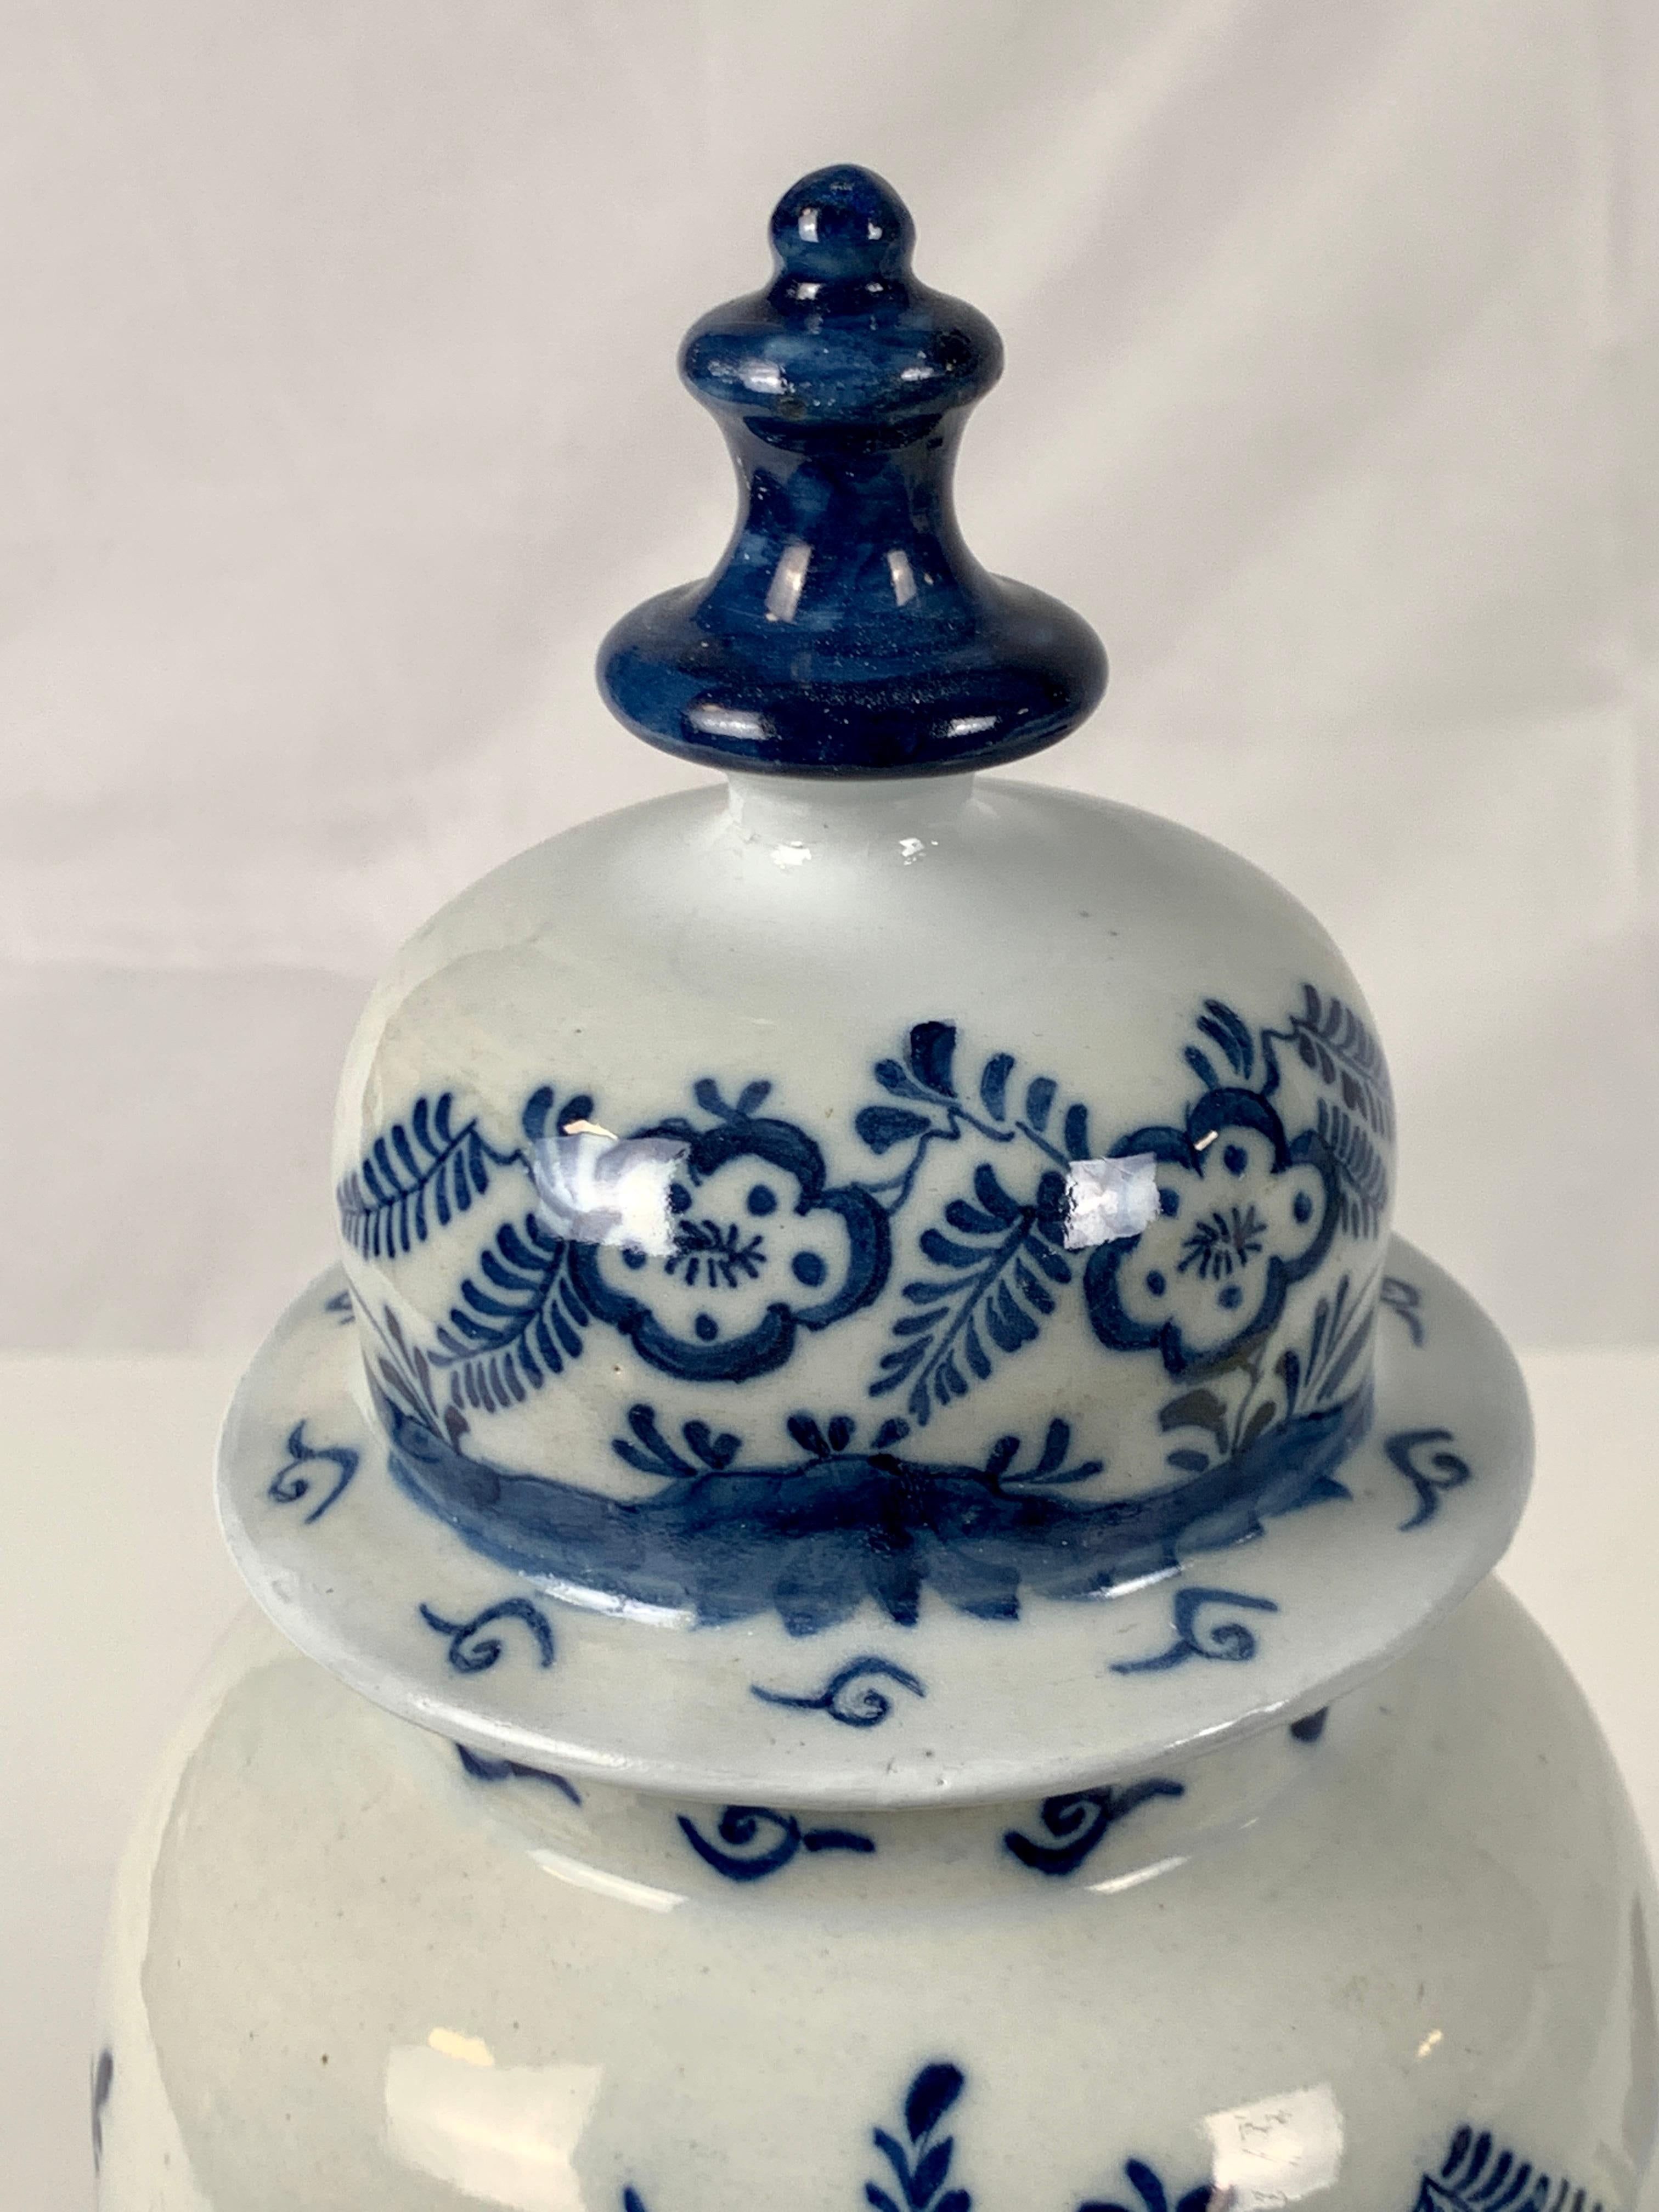 Chinoiserie Blue and White Delft Mantle Jar Hand-Painted 18th Century Netherlands Circa 1780 For Sale